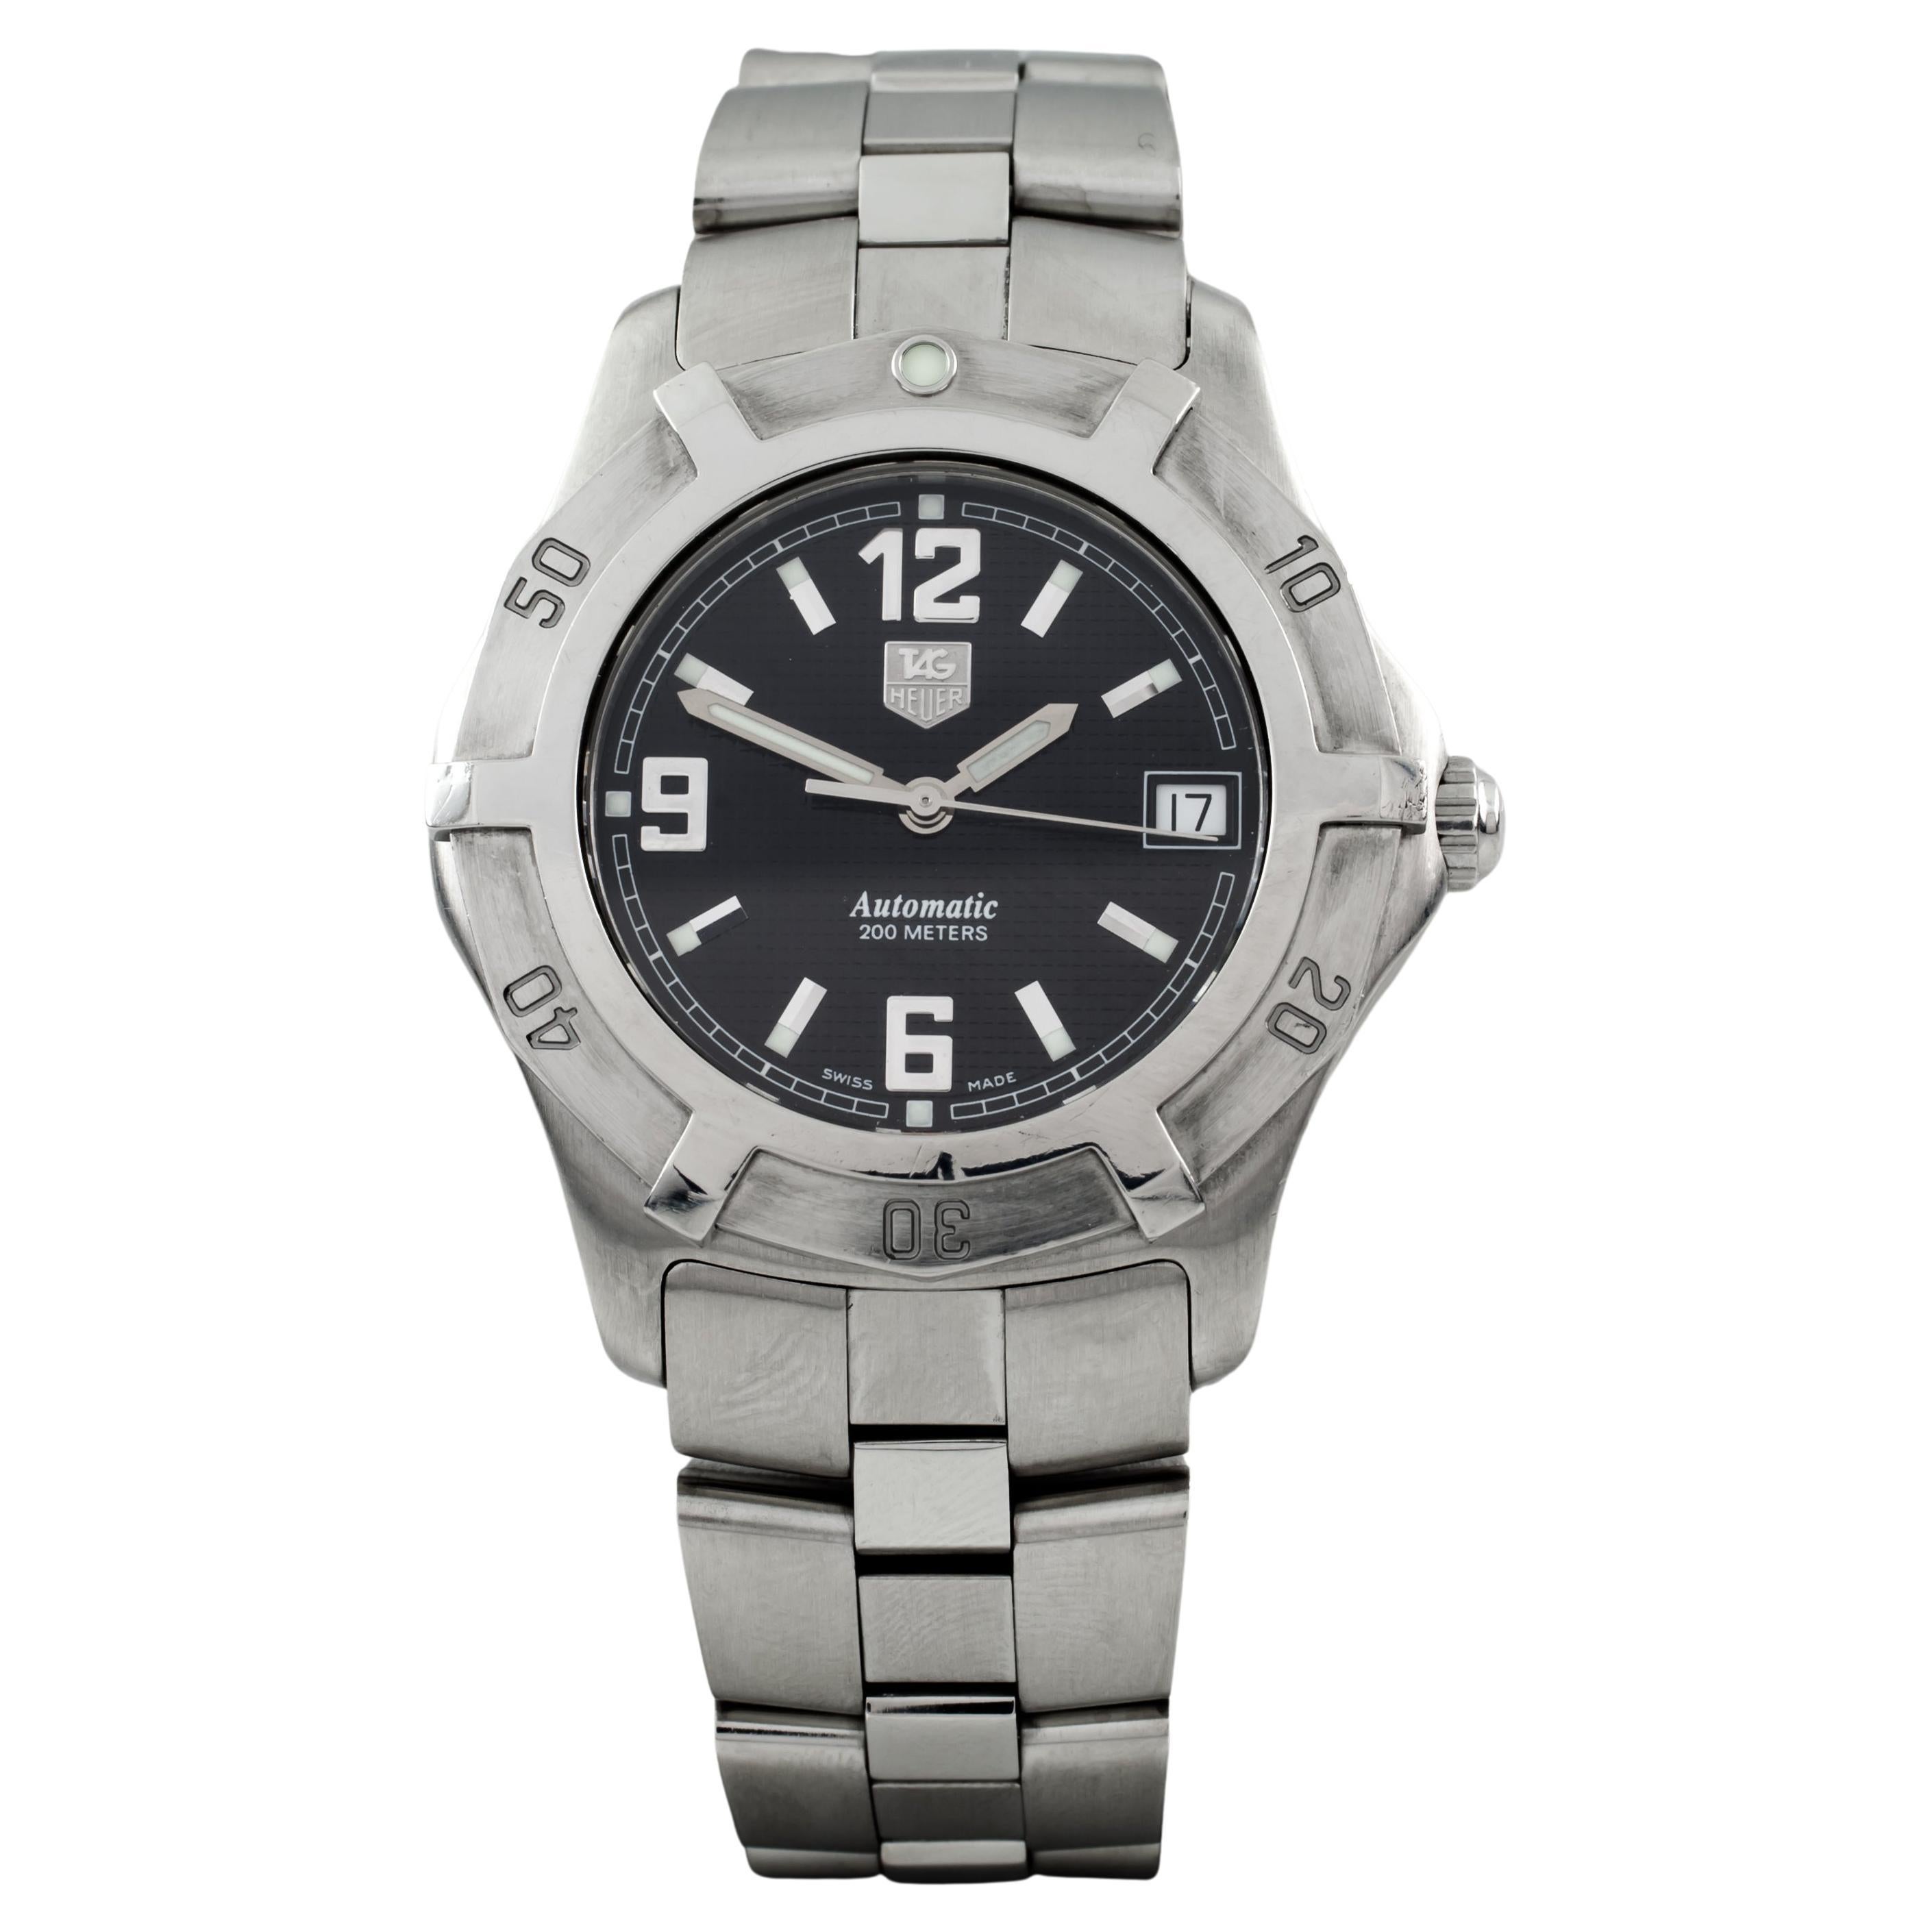 Tag Heuer Stainless Steel Men's Automatic Watch 200 M WN2111 w/ Date For Sale